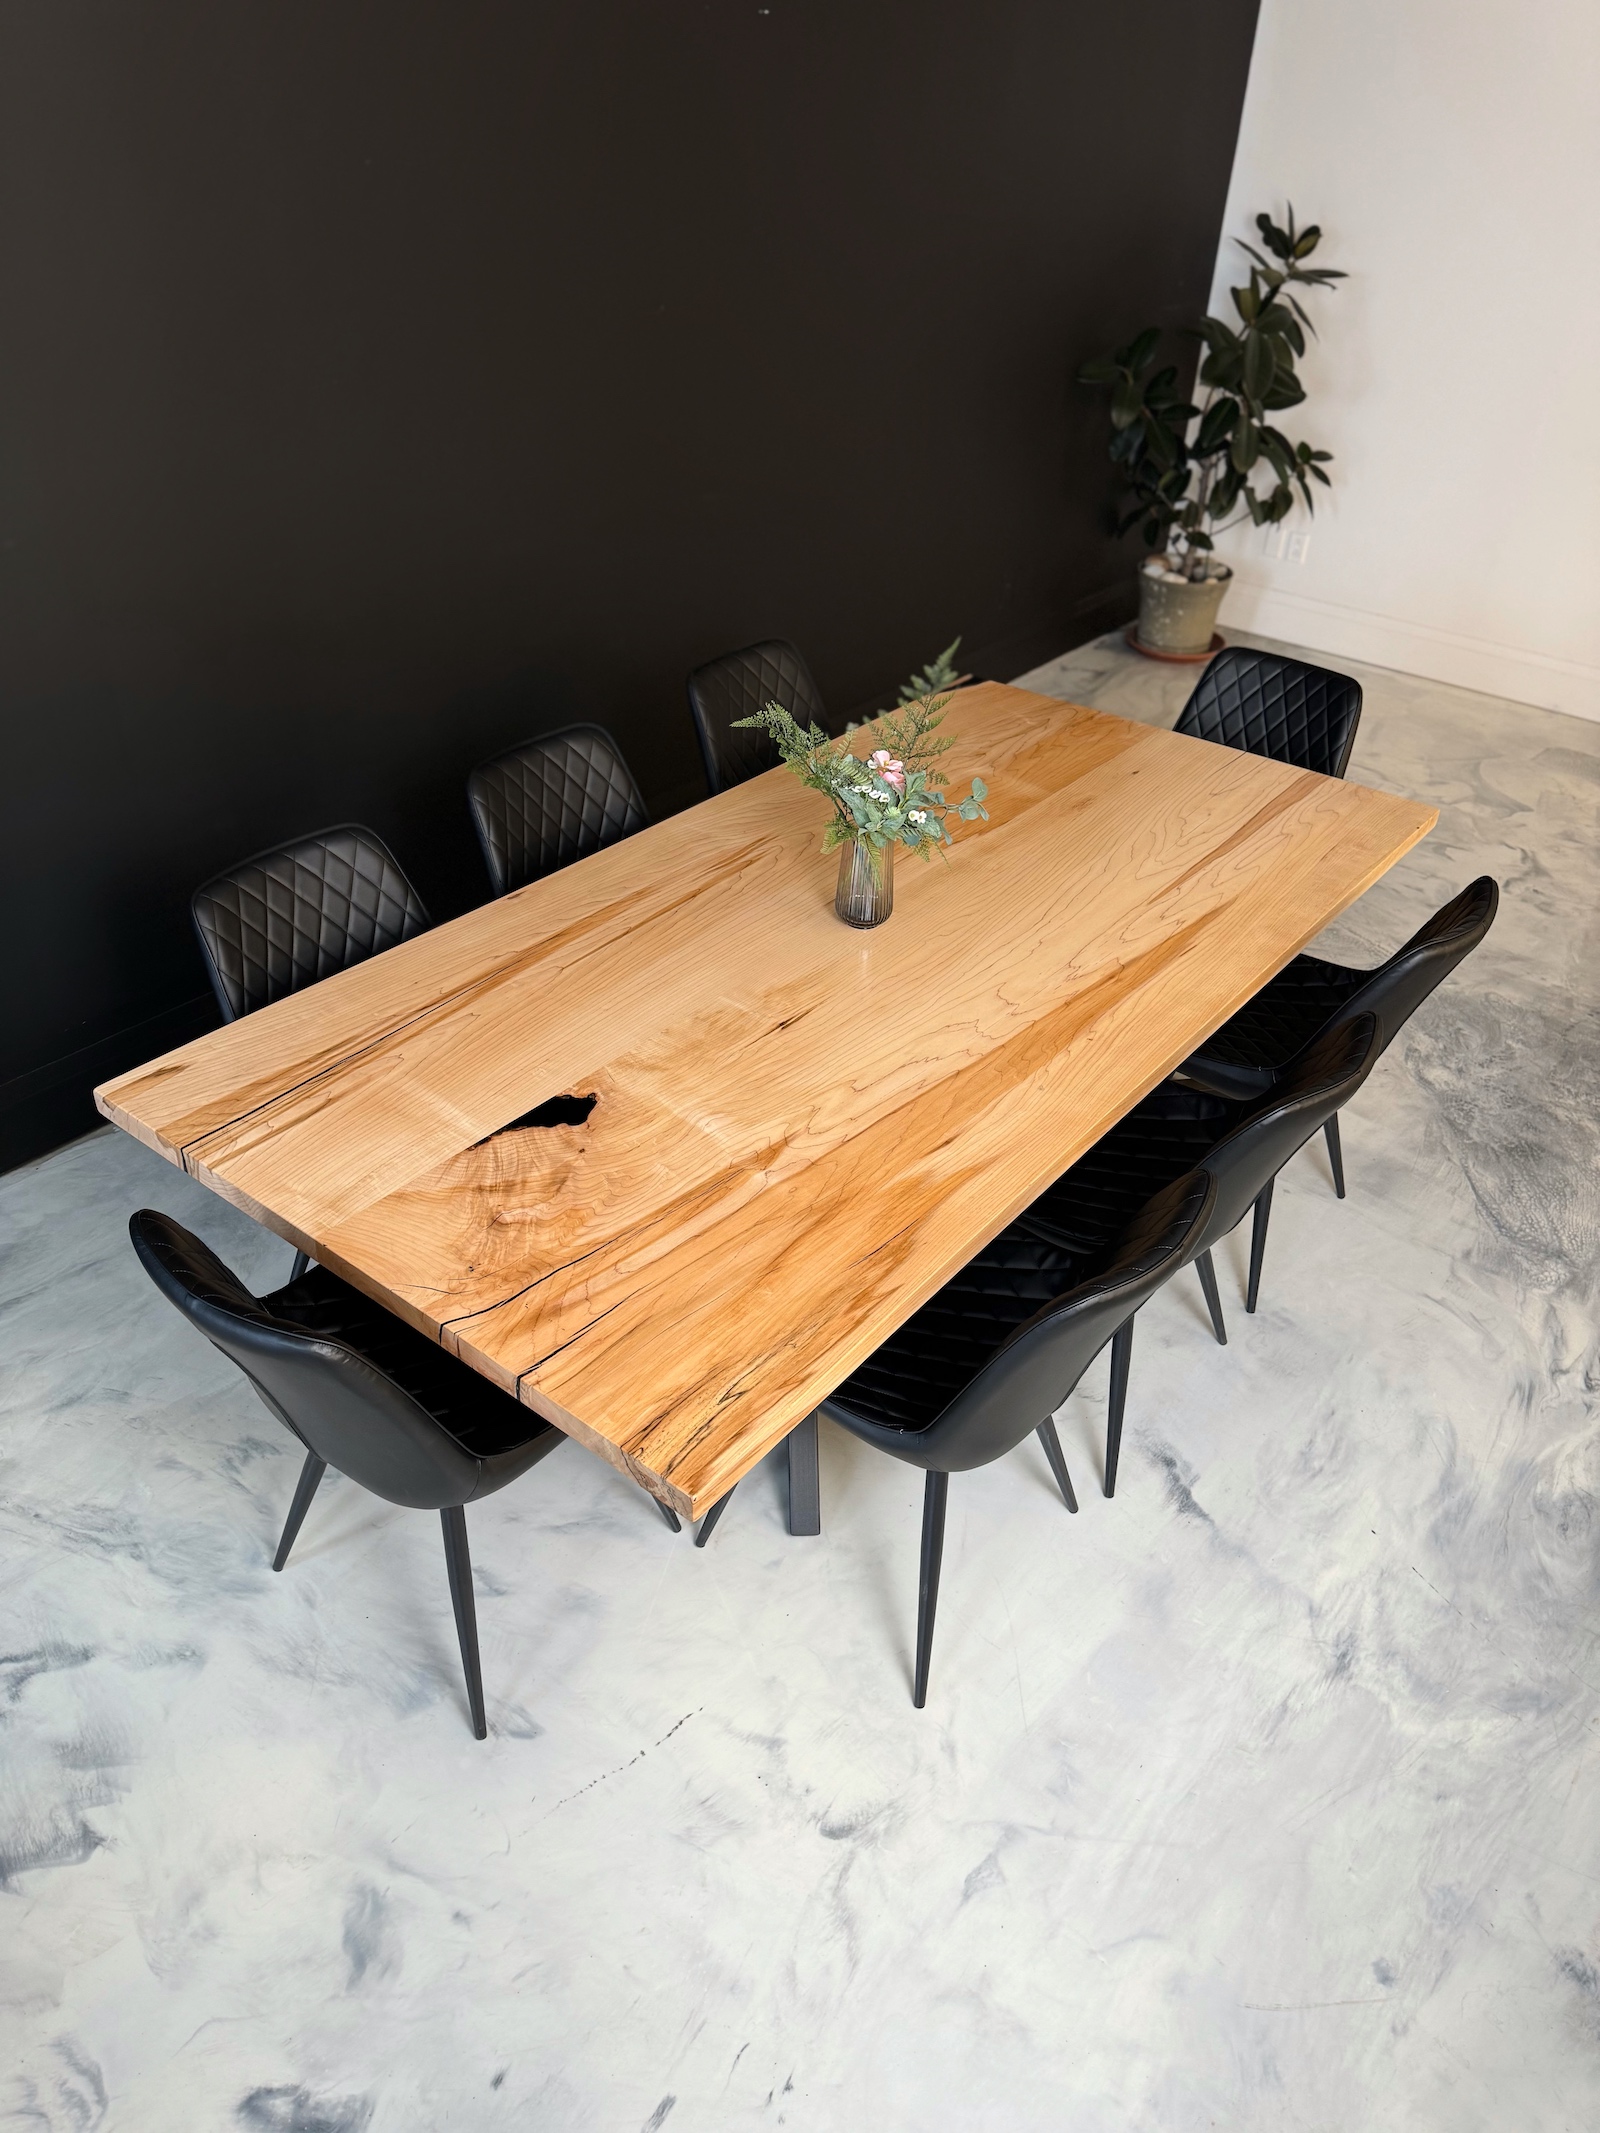 Maple Dining Room Table - All Wood